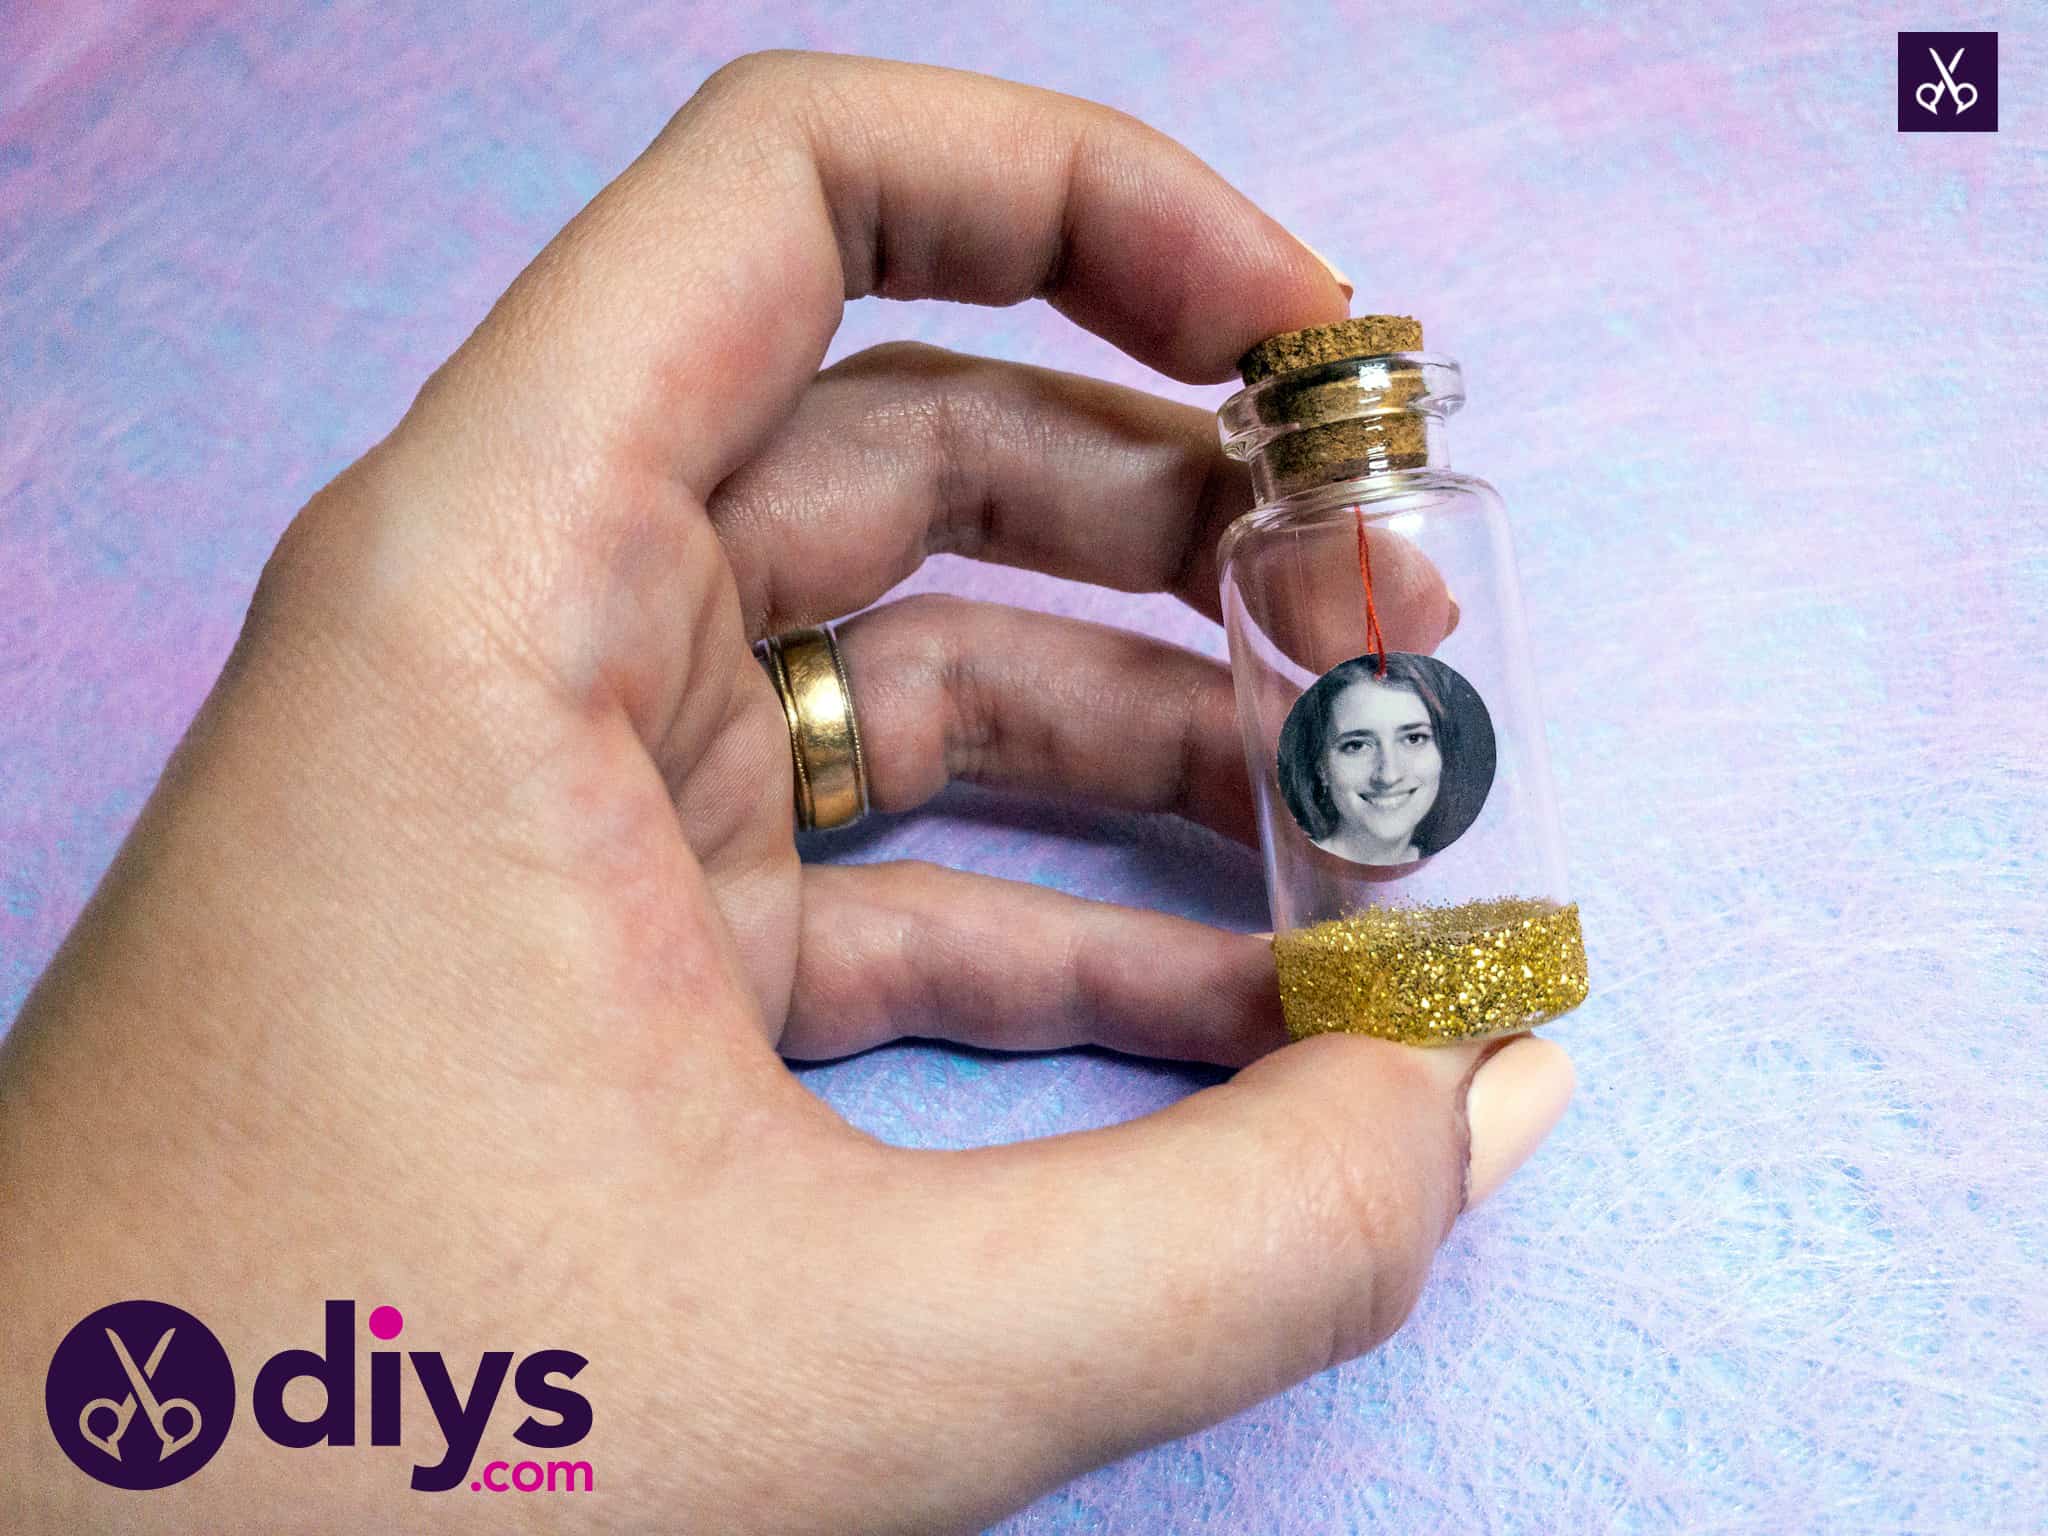 How to make a tiny photo in a bottle